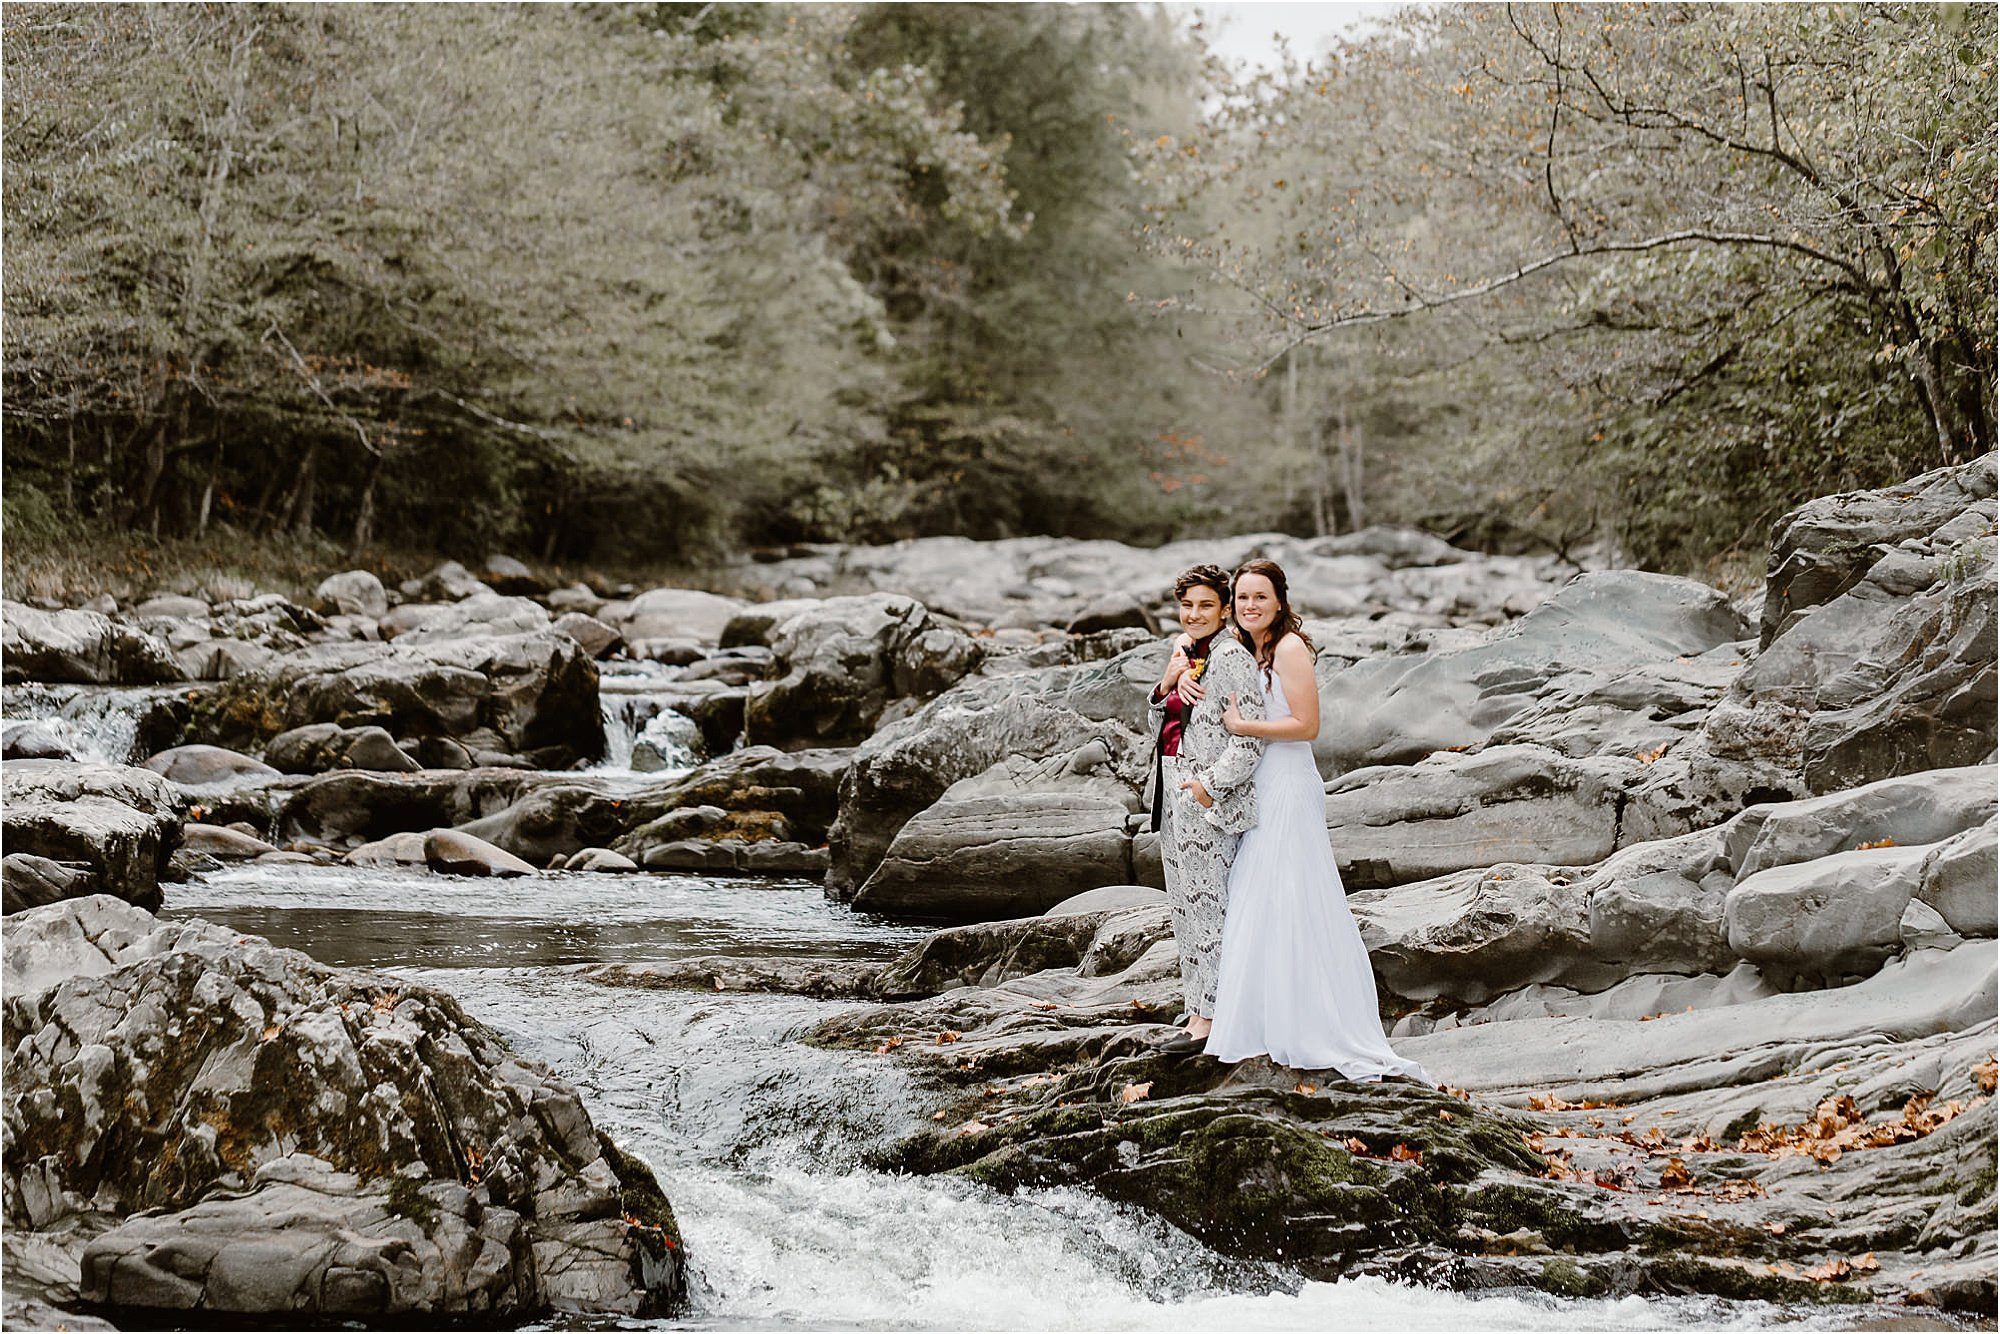 wedding photos on The Little River in the Smokies